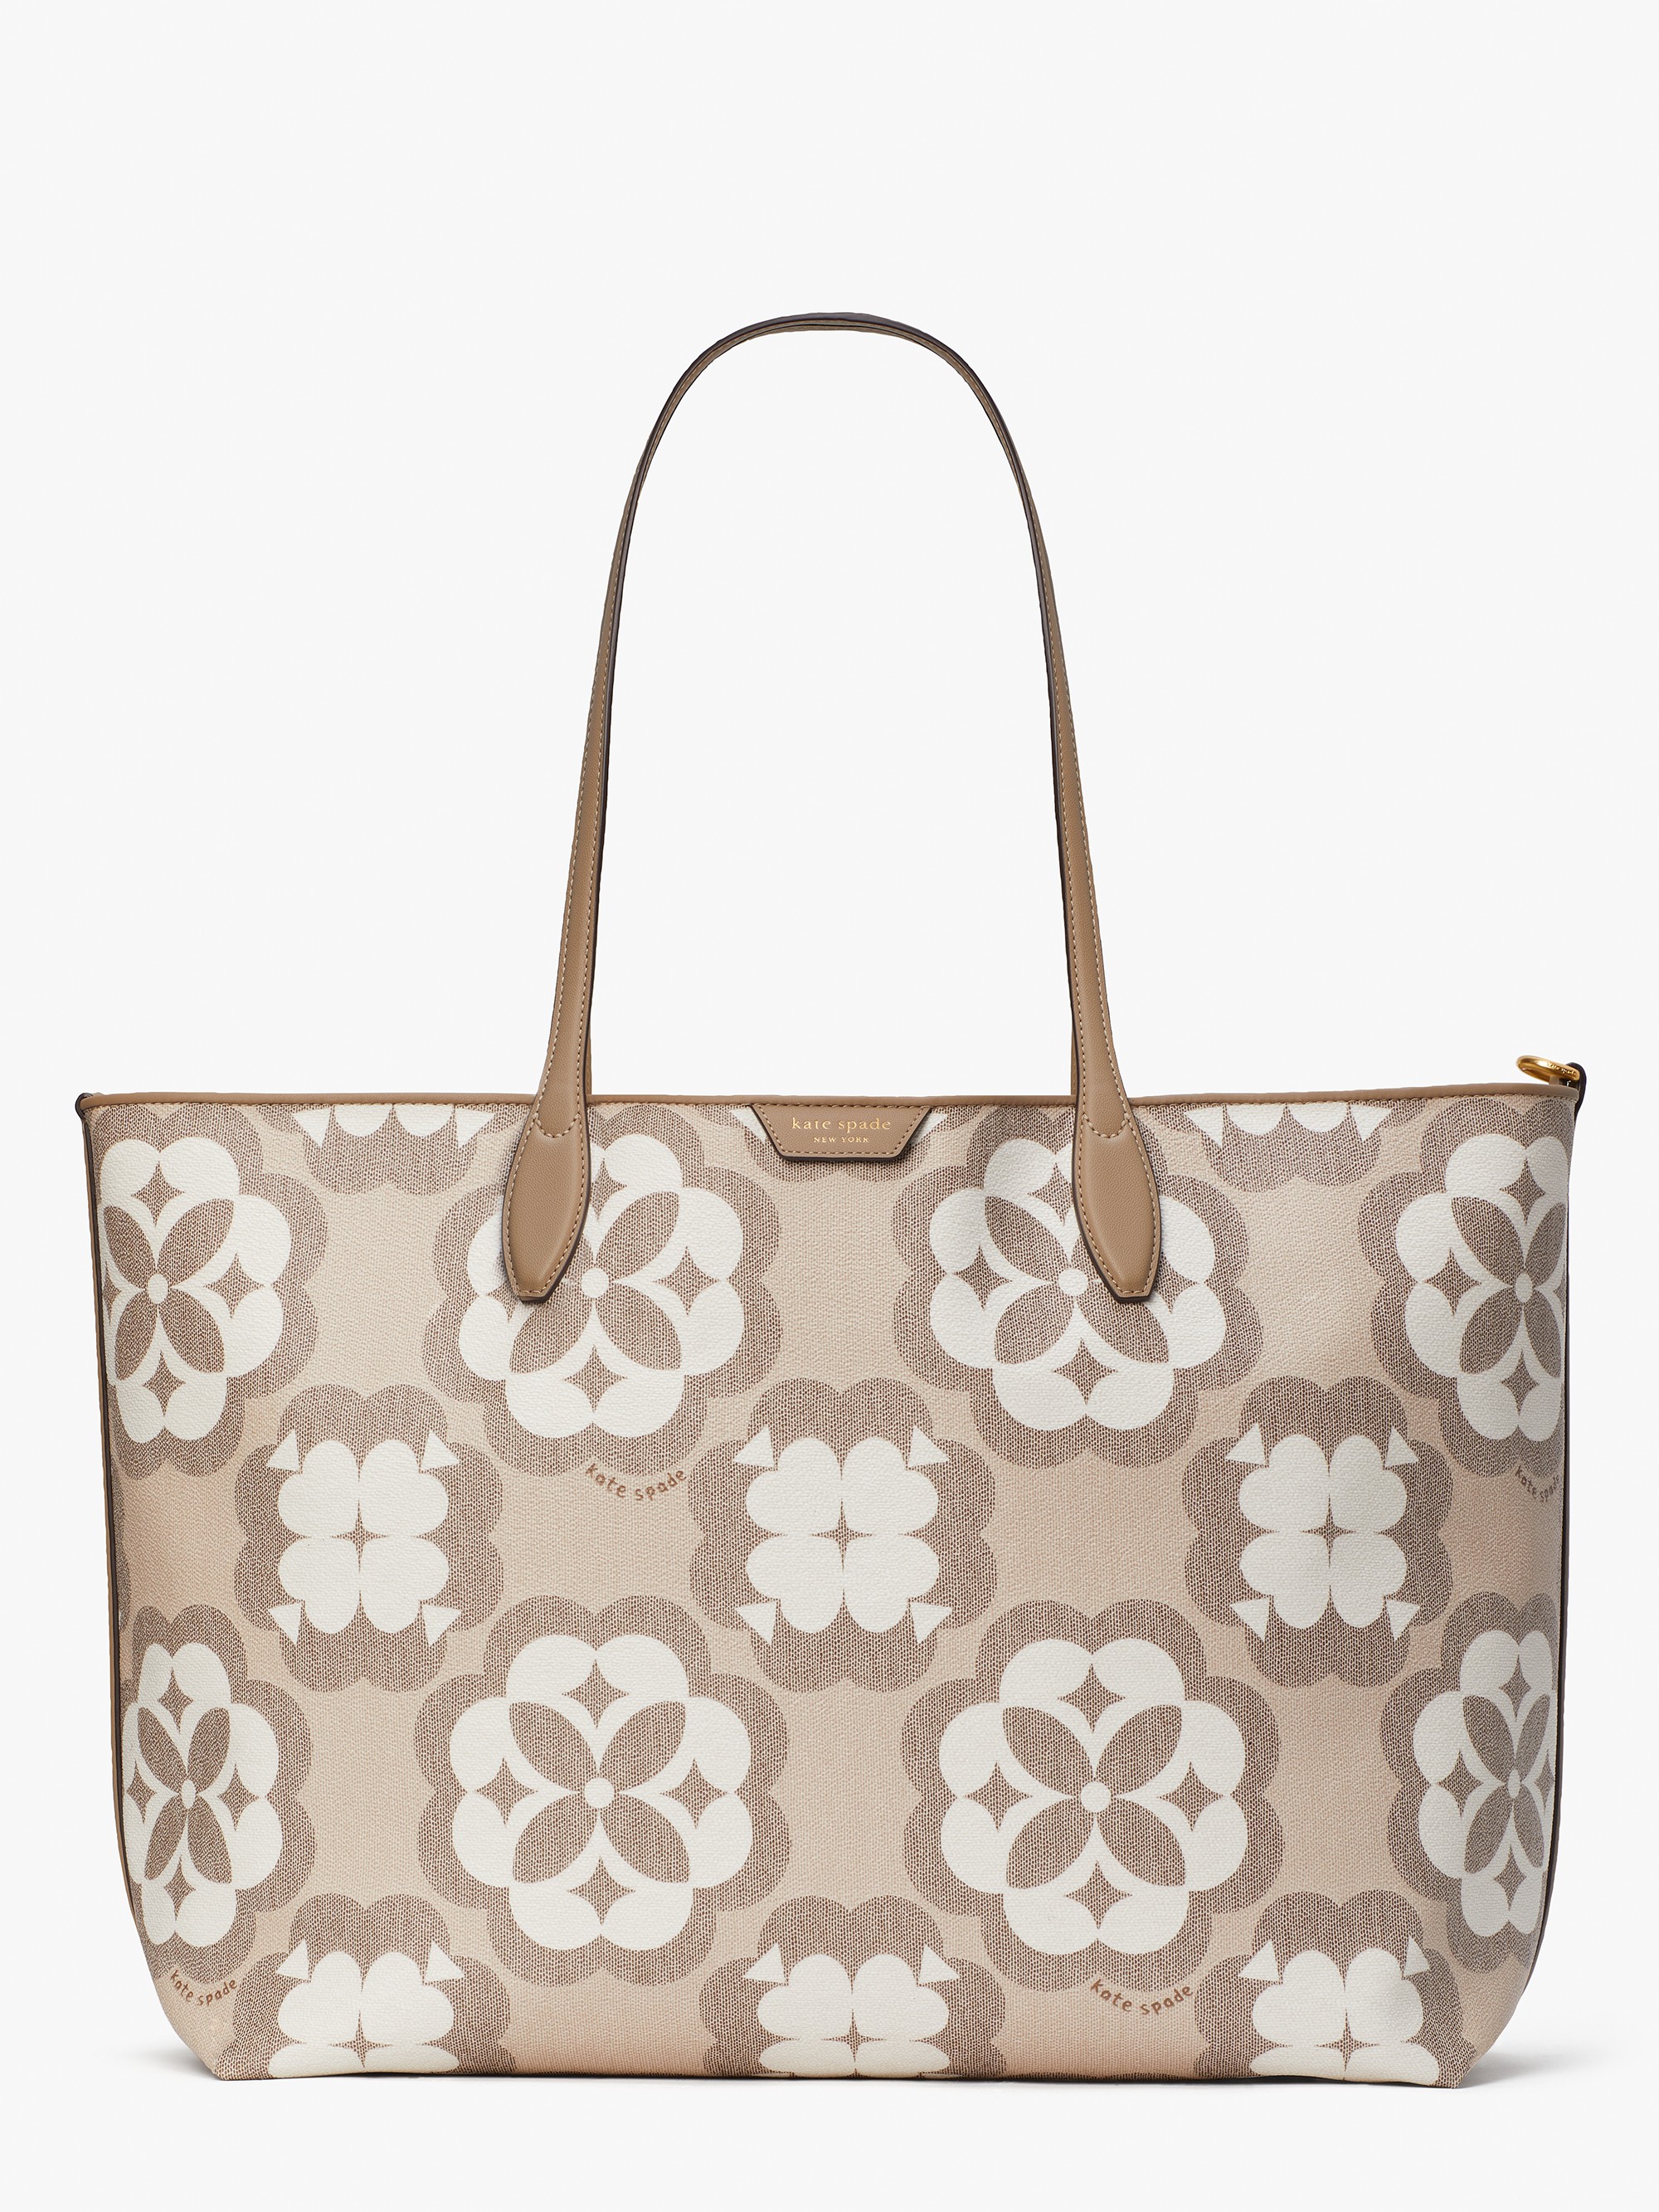 oversized spade flower monogram coated canvas sutton large tote